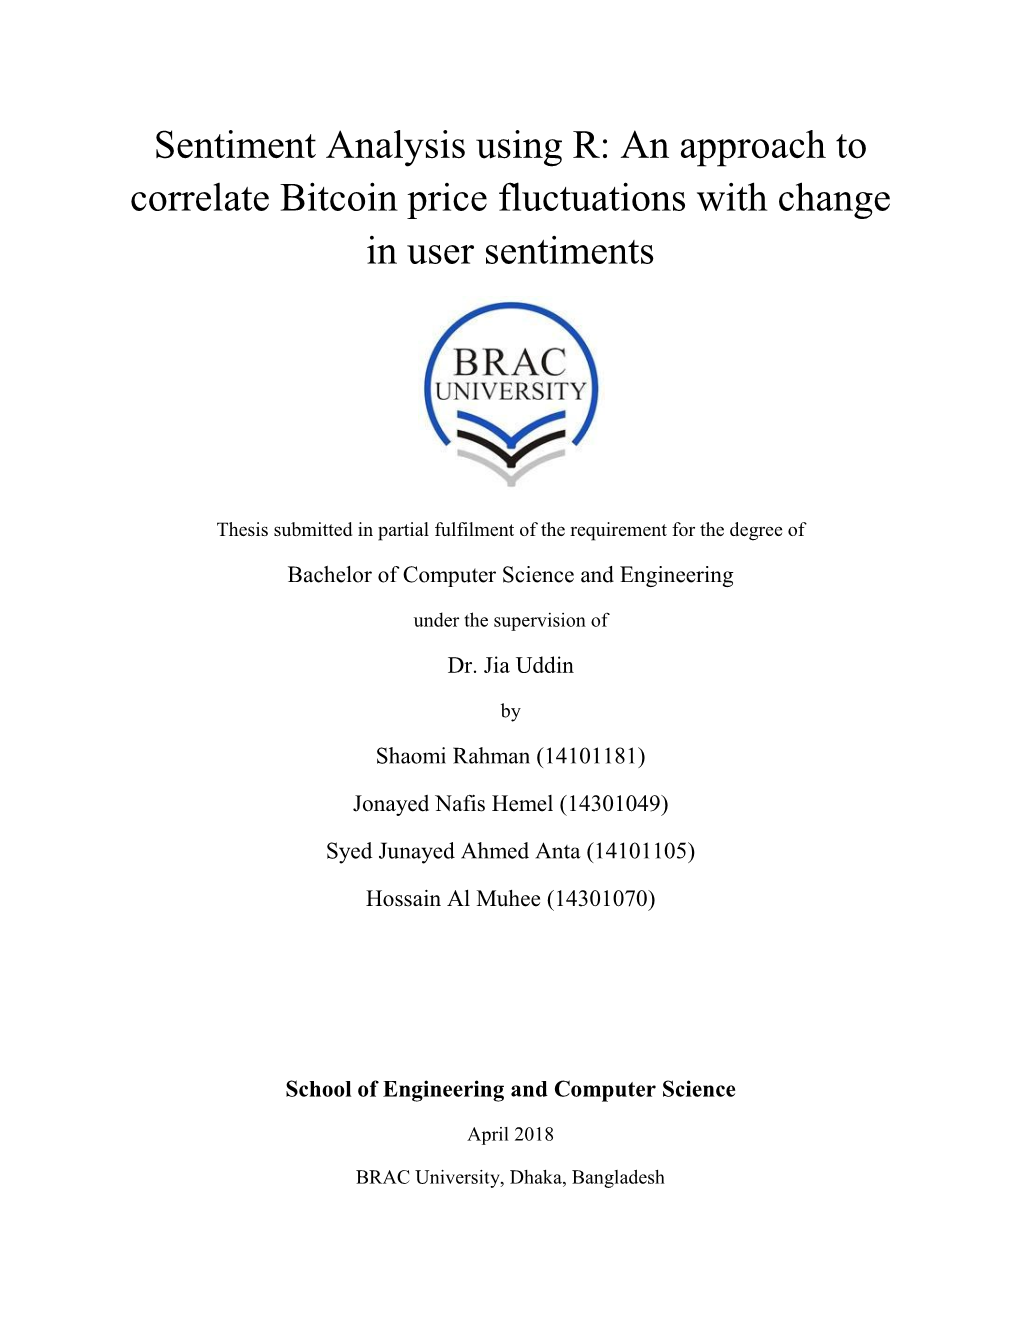 Sentiment Analysis Using R: an Approach to Correlate Bitcoin Price Fluctuations with Change in User Sentiments